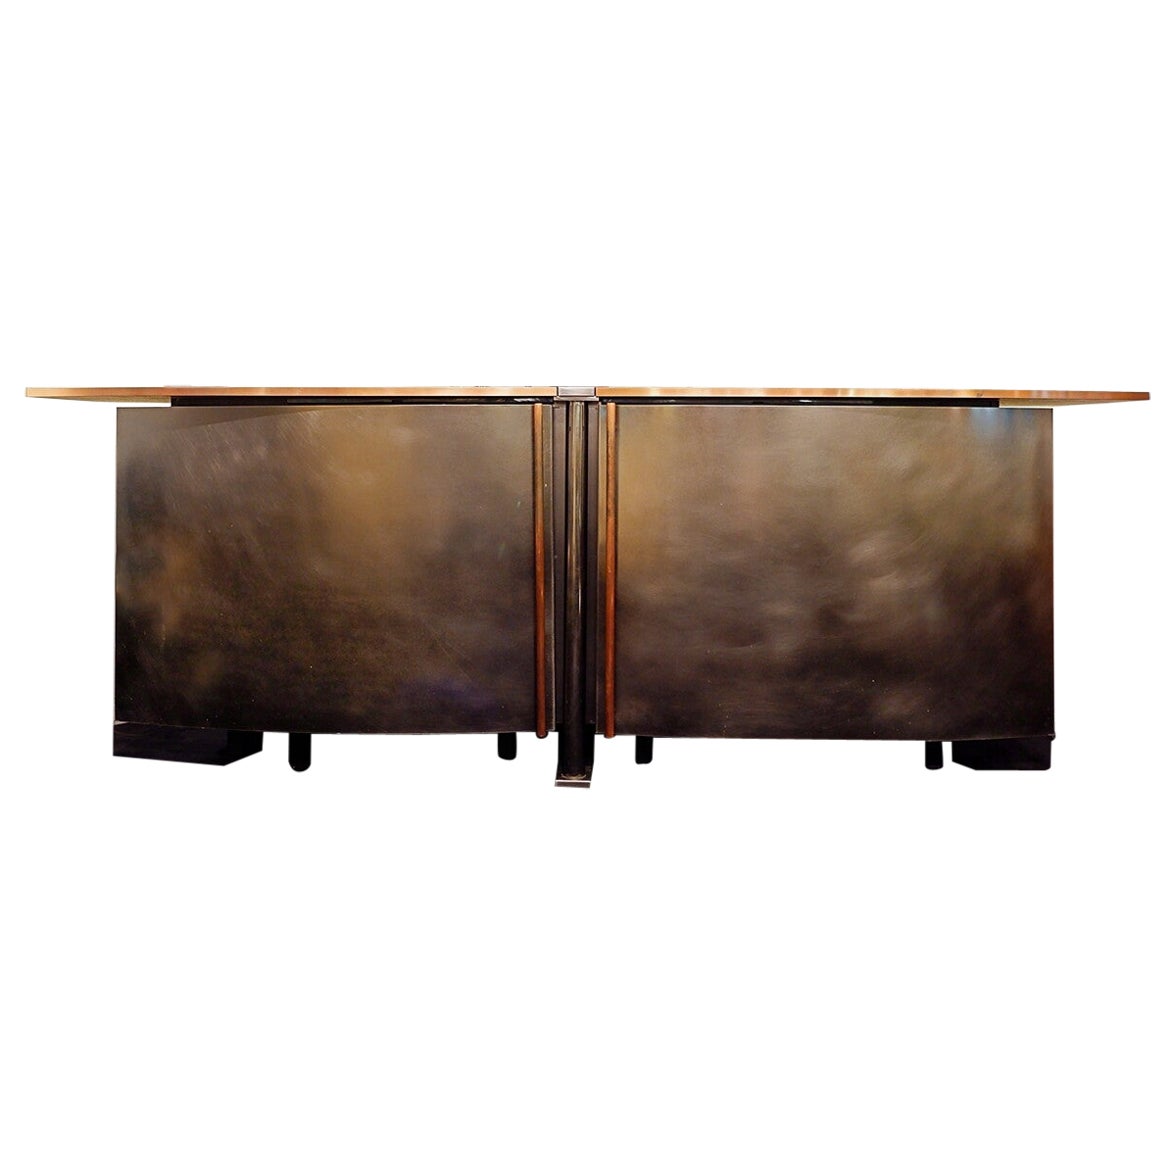 Brass & Copper Metal Sideboard by Belgo Chrom, 1970s, Mid-Century Modern For Sale